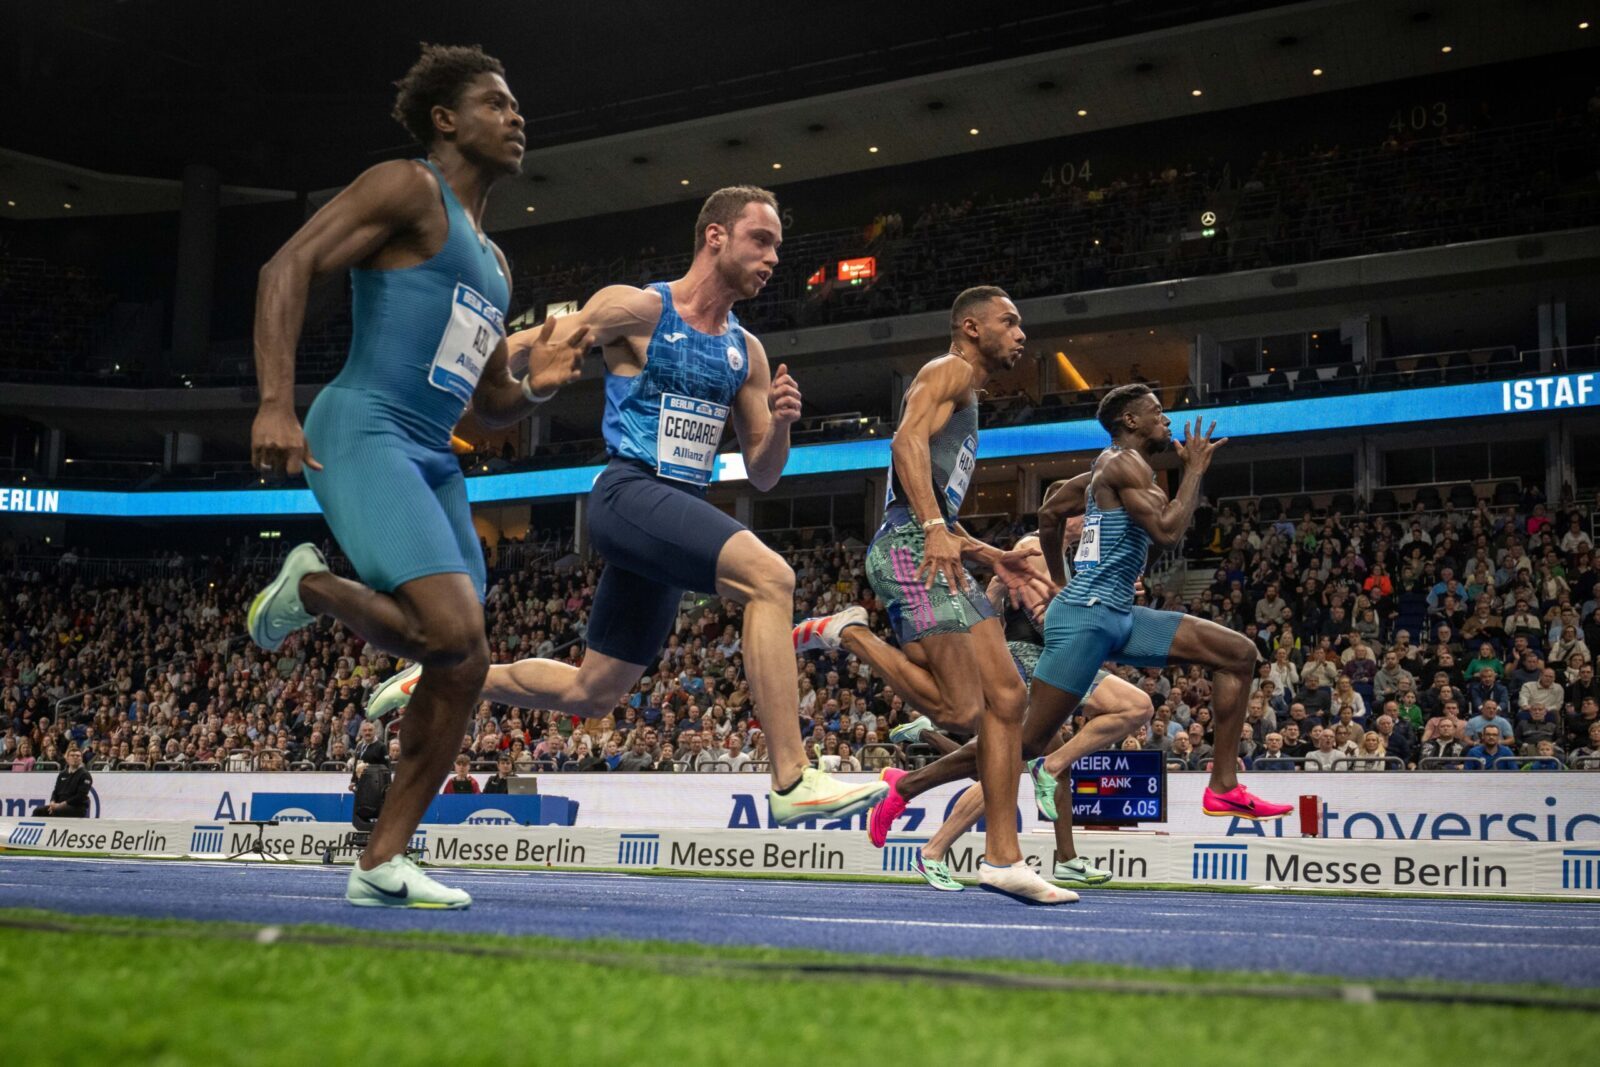 Duplantis comes close to world record as Prescod and Neita produce strong British sprint double in Berlin